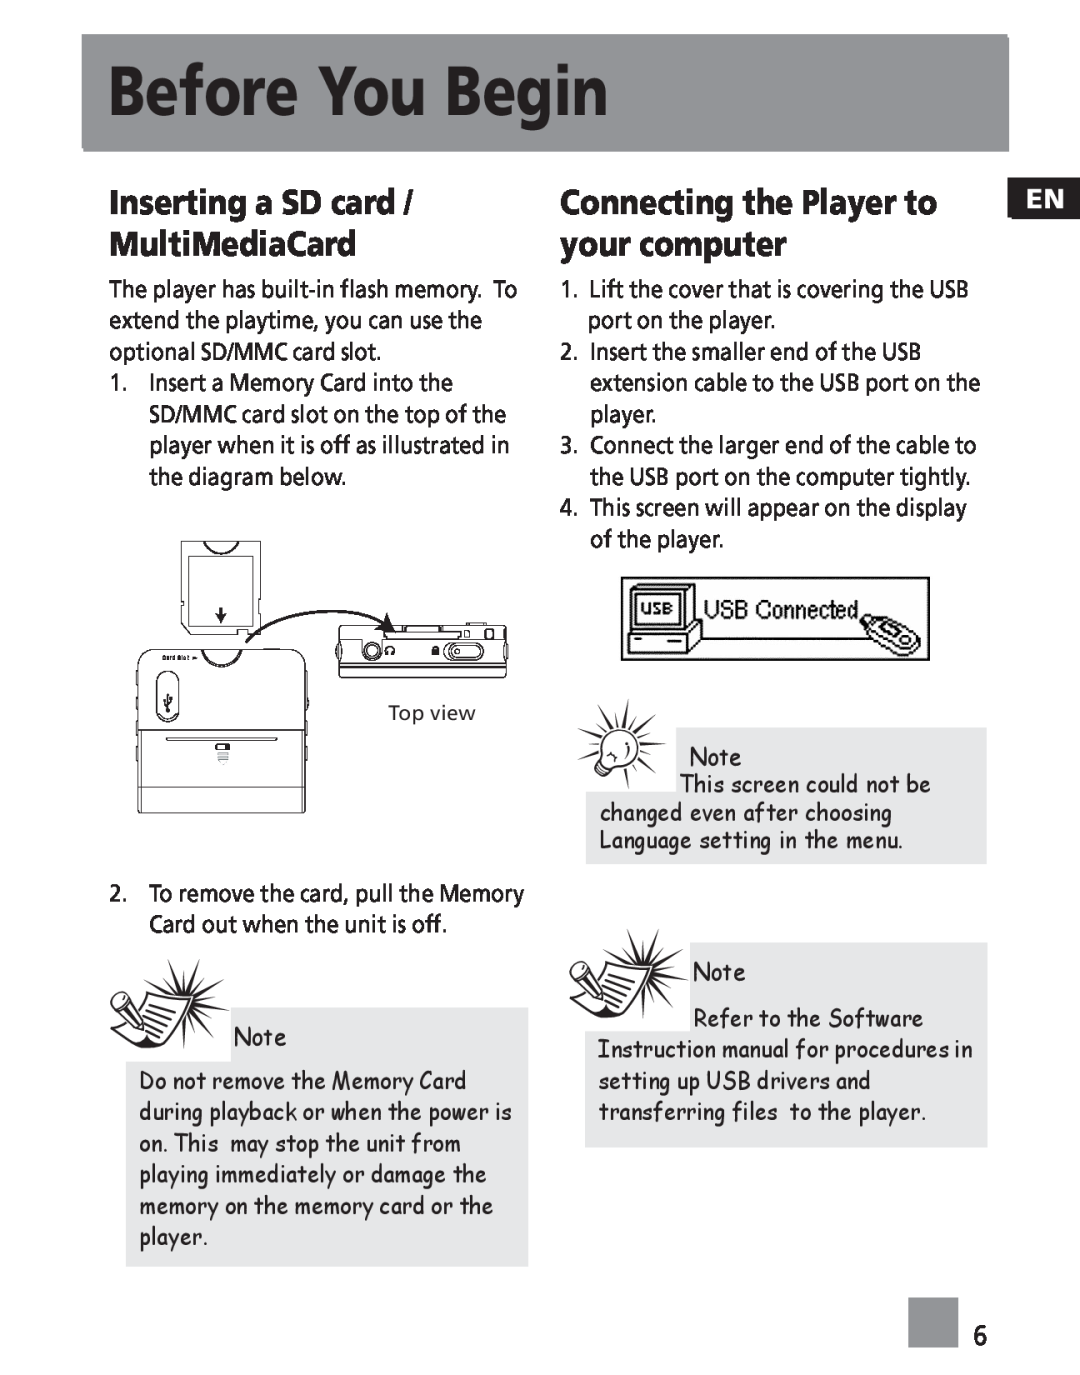 RCA MC2021, M2030, M202, M2011 Inserting a SD card MultiMediaCard, Connecting the Player to, your computer, Before You Begin 